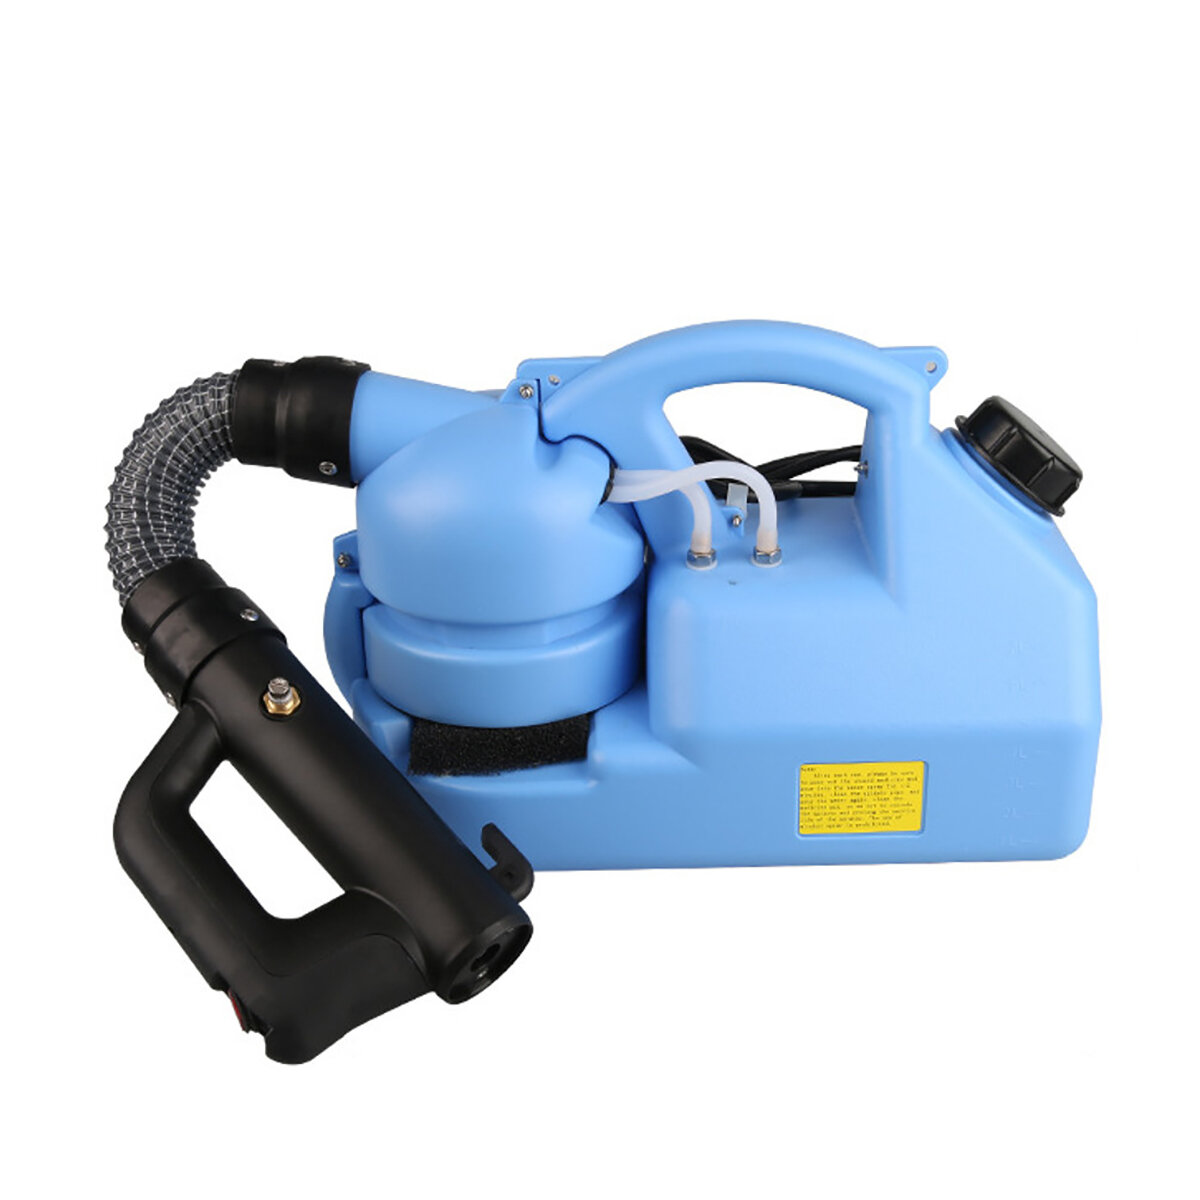 

7L ULV Electric Fogger Disinfection Sprayer Weed Killer Office Home Portable